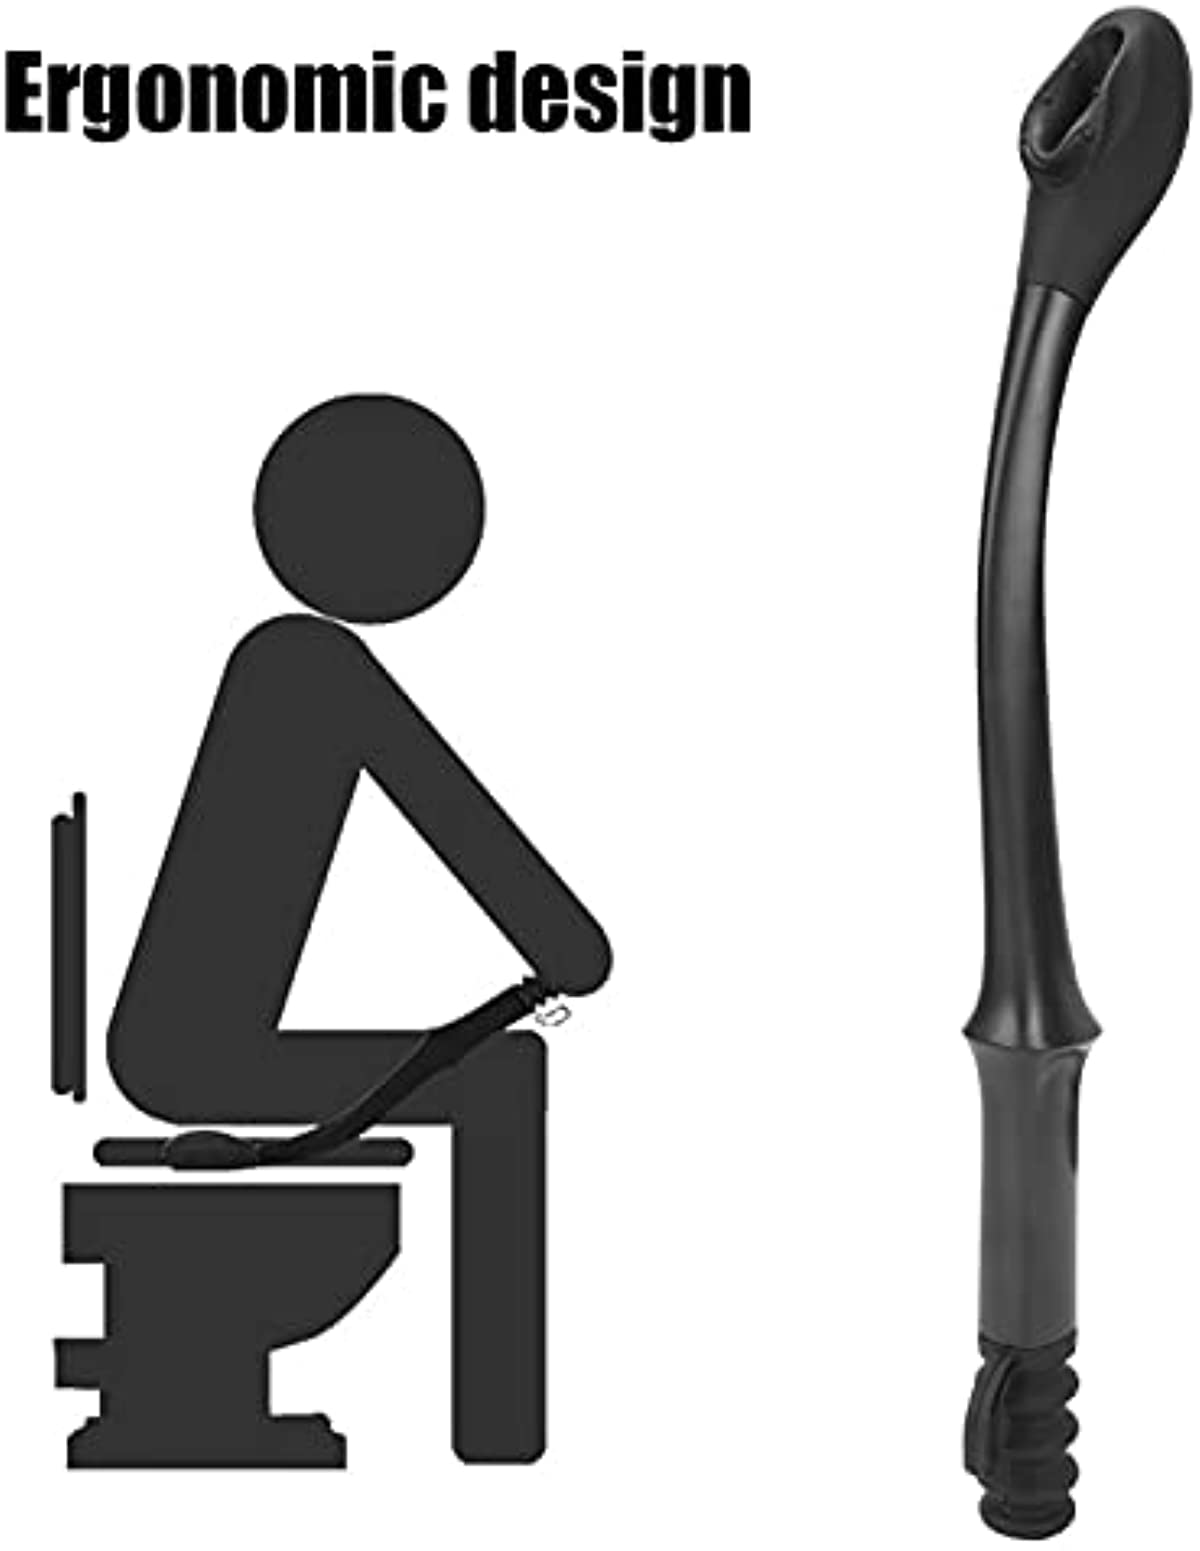 Toilet Aids Tools, 15.7in Long Reach Comfort Wiper Toilet Paper Wiping Aids Long Reach Comfort Self Assist Wiper Wipe Assist Tool for Limited Mobility Elderly Inconvenient People(black)